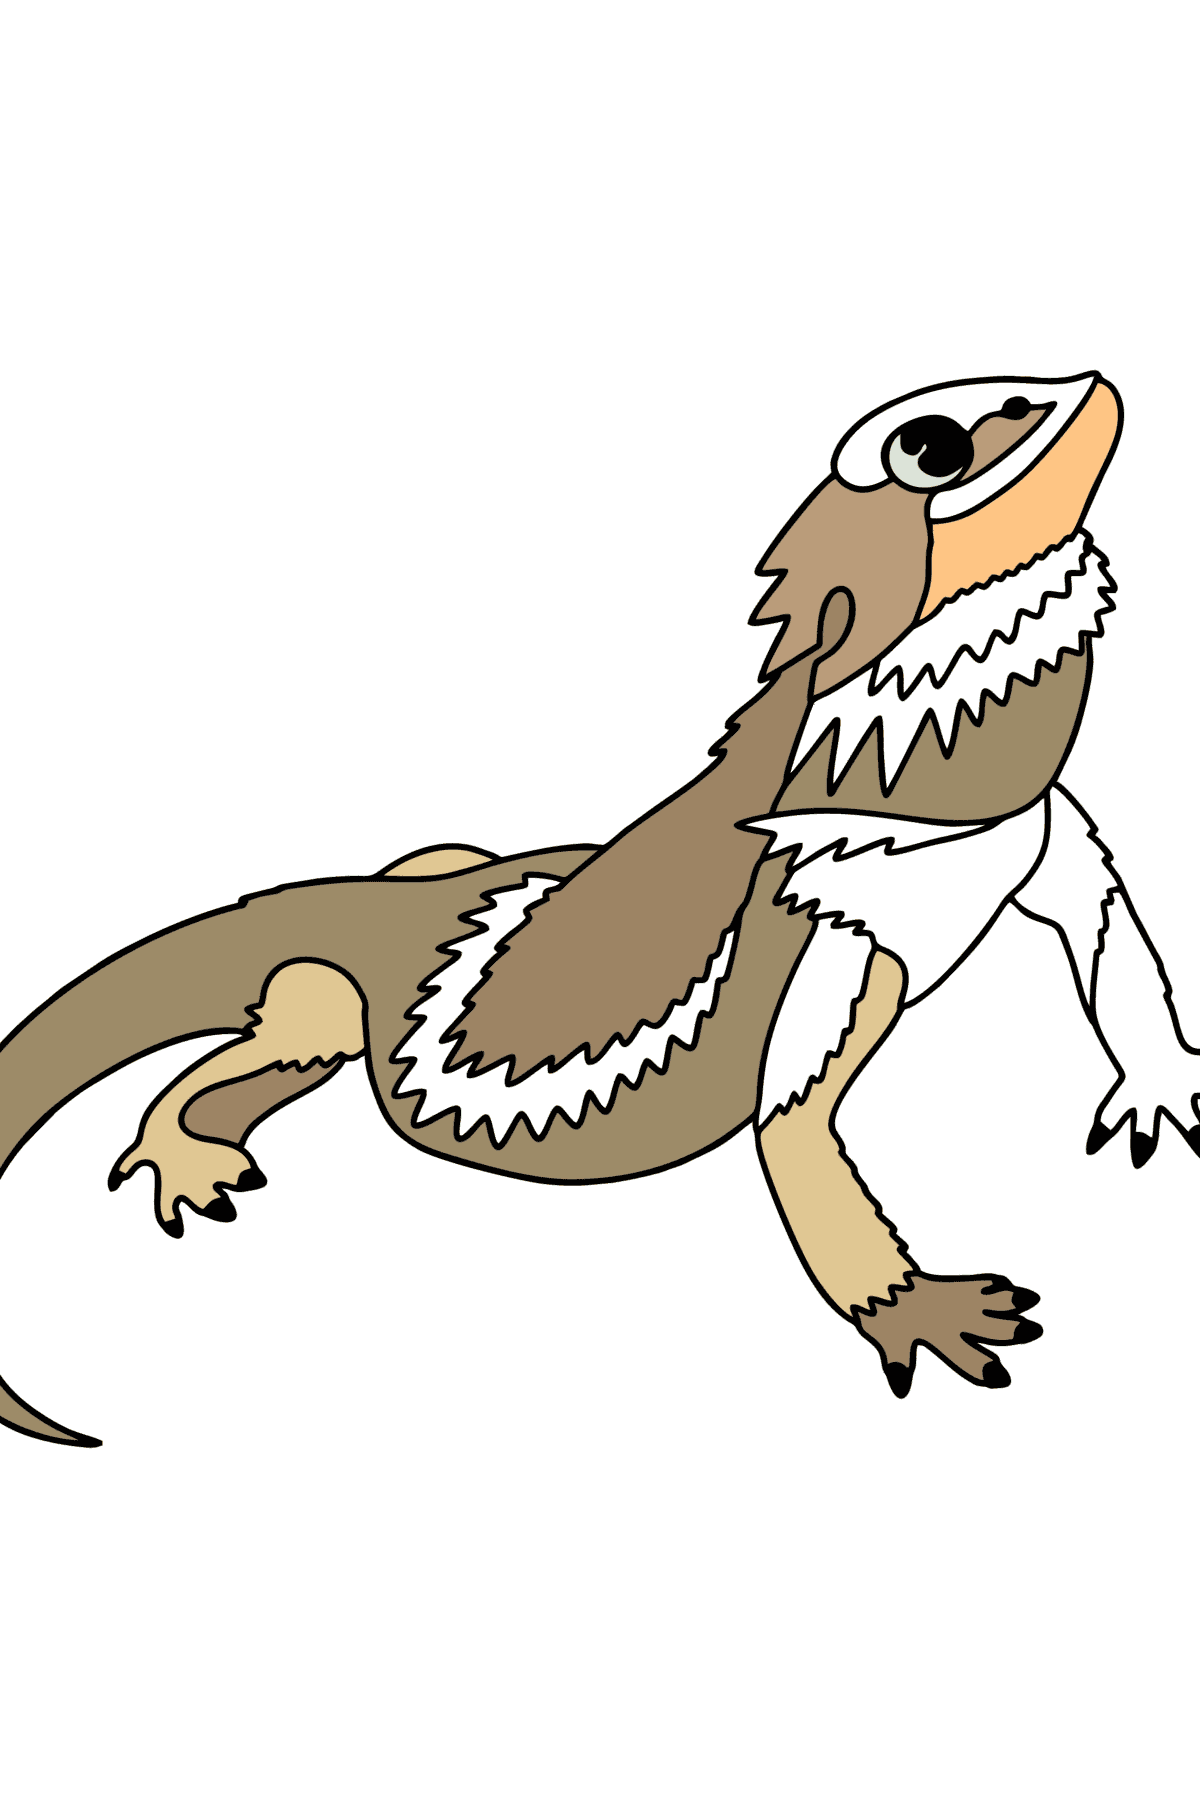 Lizard Bearded Dragon сoloring page - Coloring Pages for Kids